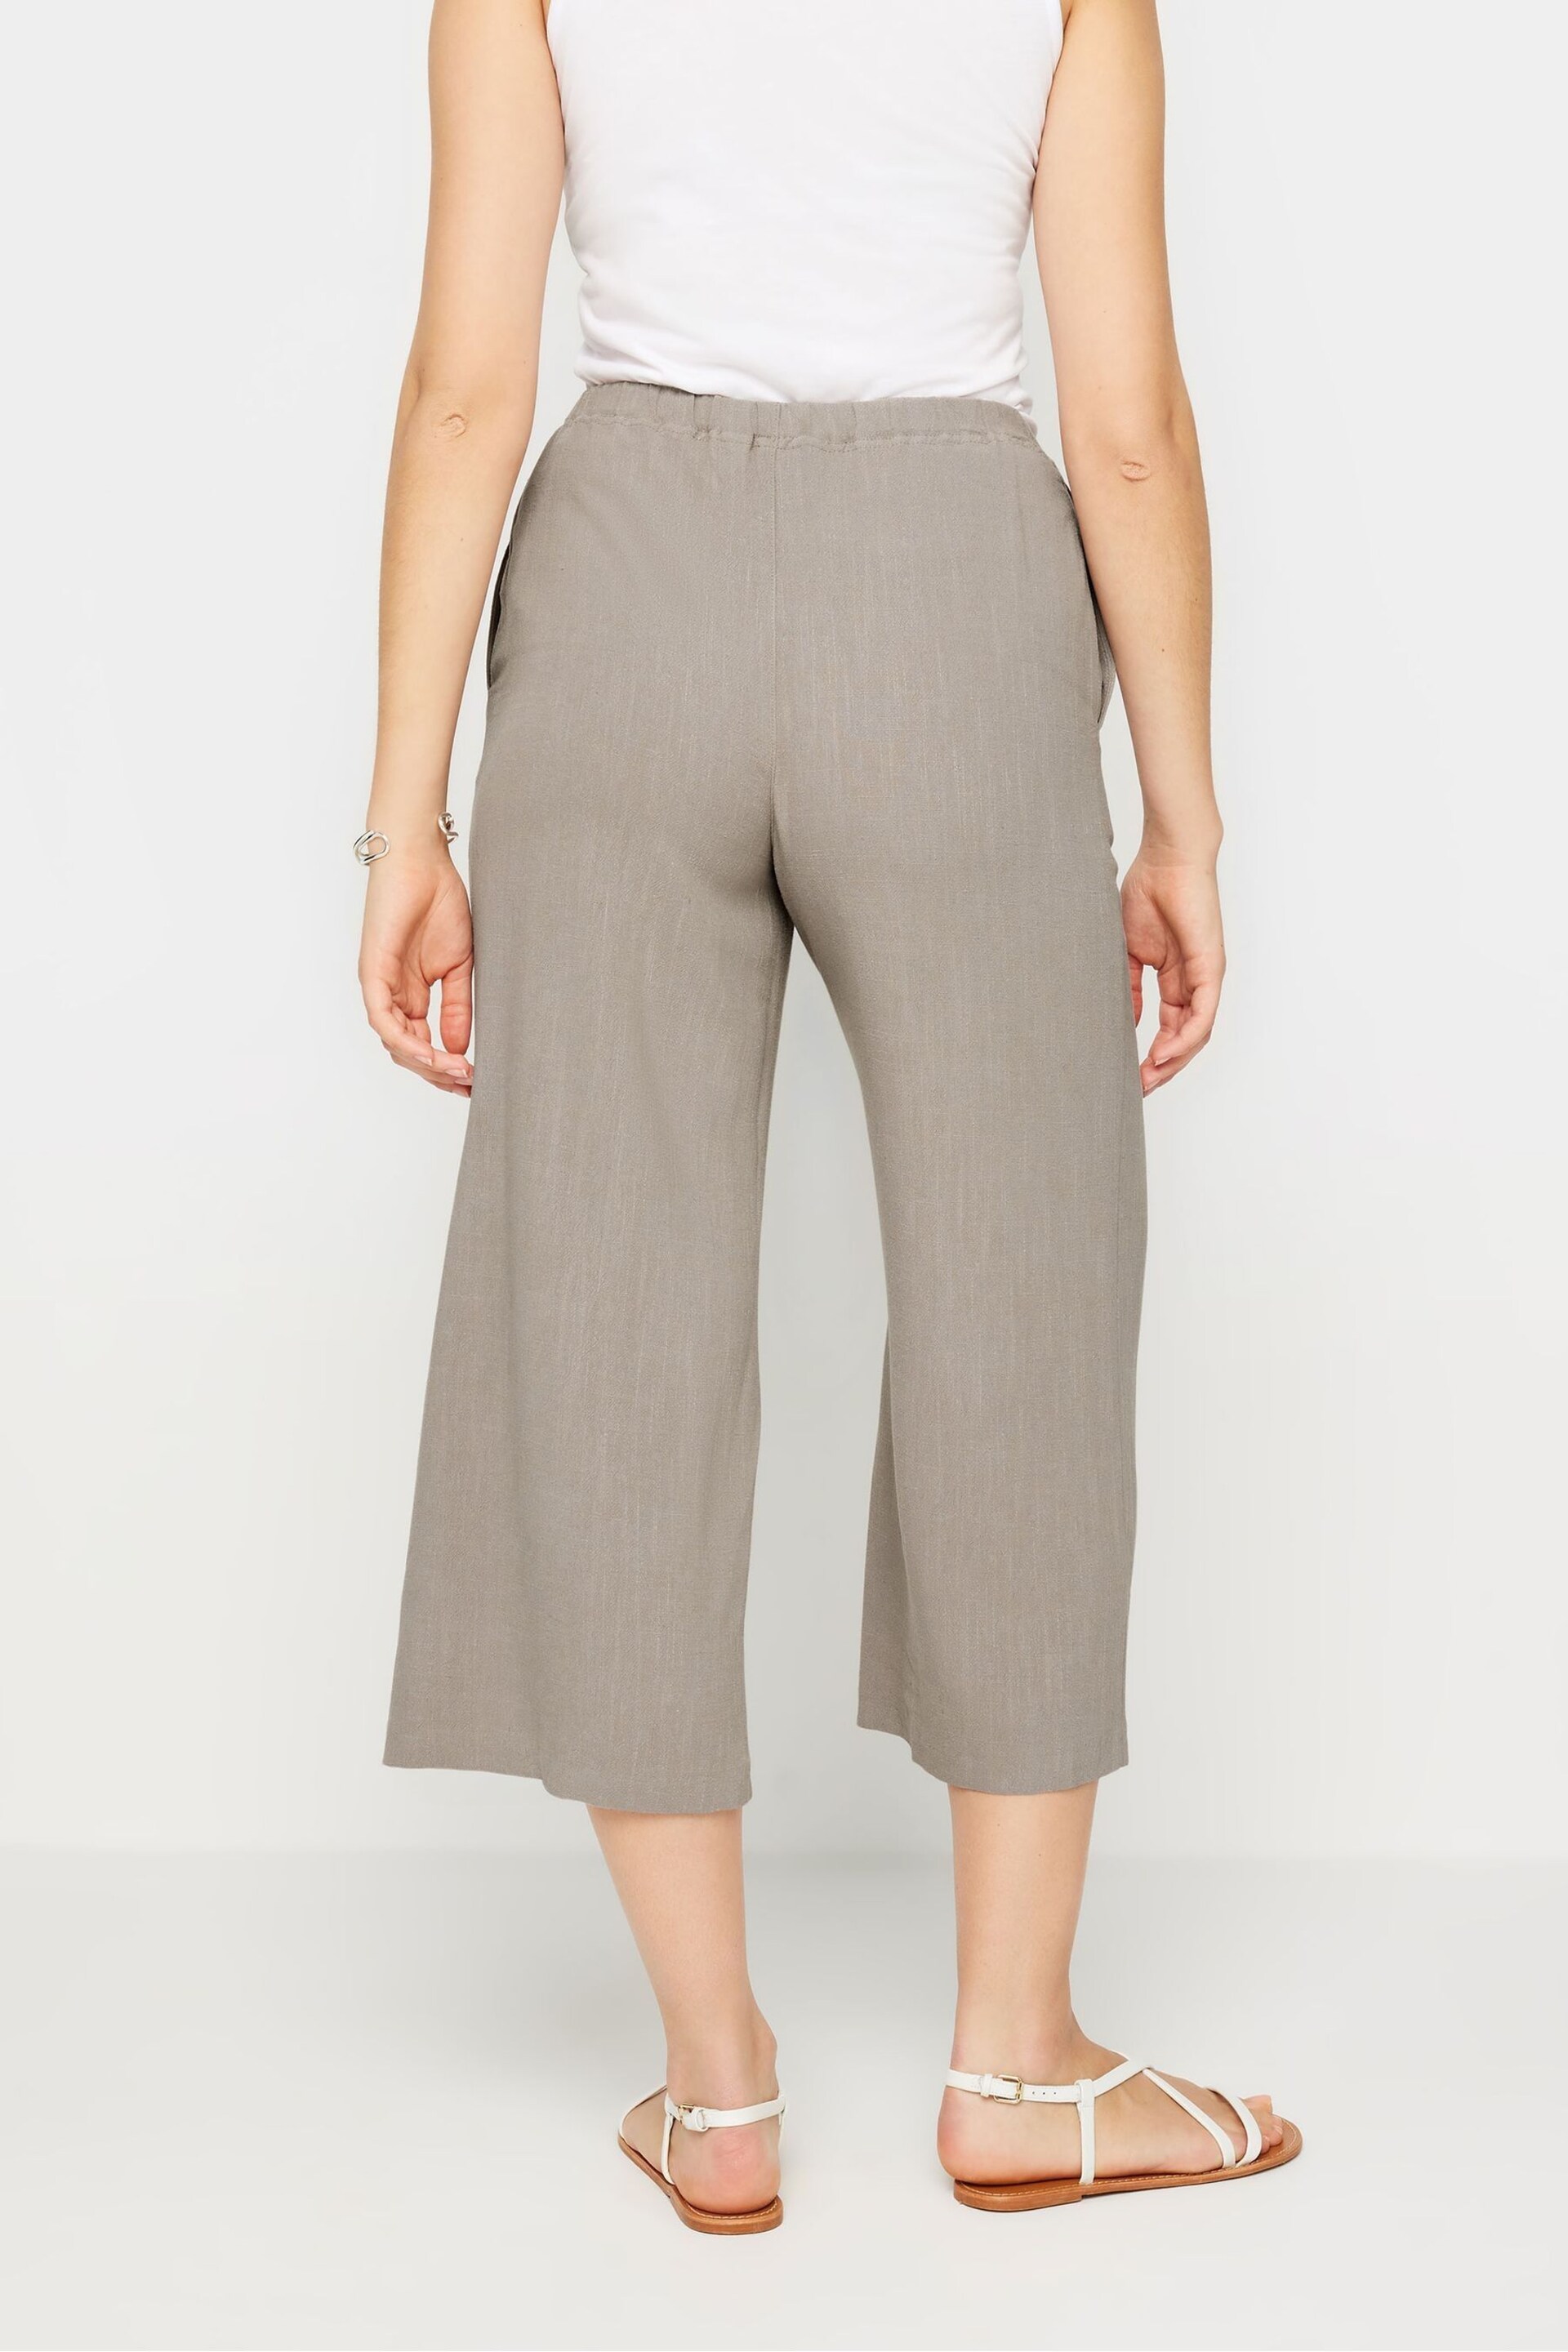 Long Tall Sally Natural Cropped Sand Linen Blend Trousers - Image 3 of 5